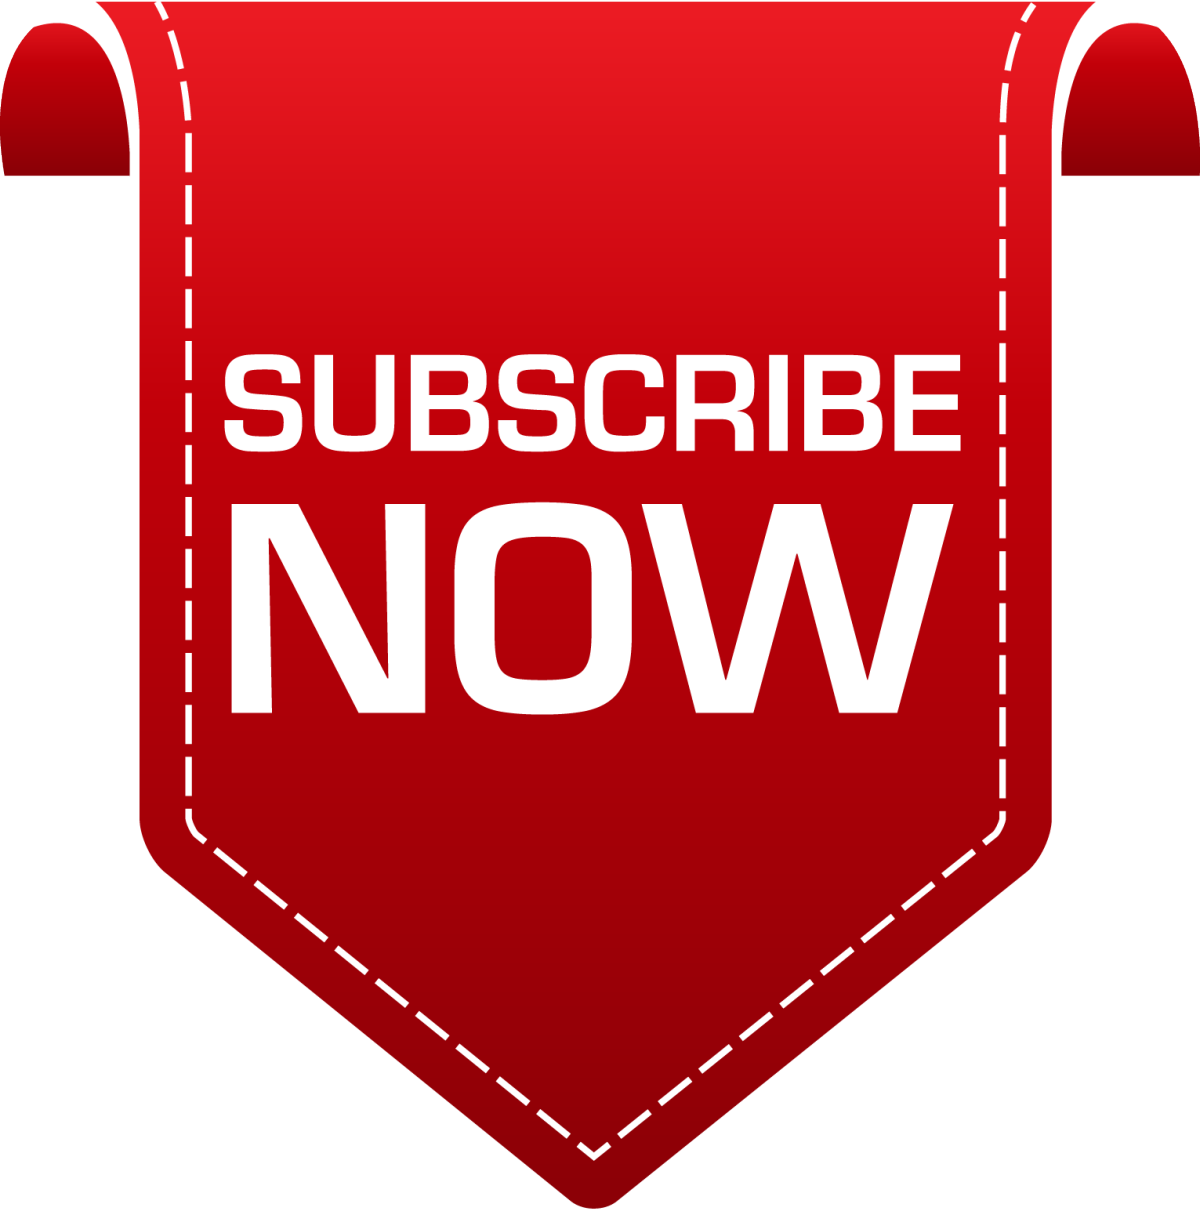 Subscribe Image #574 - Www Gratis, Transparent background PNG HD thumbnail